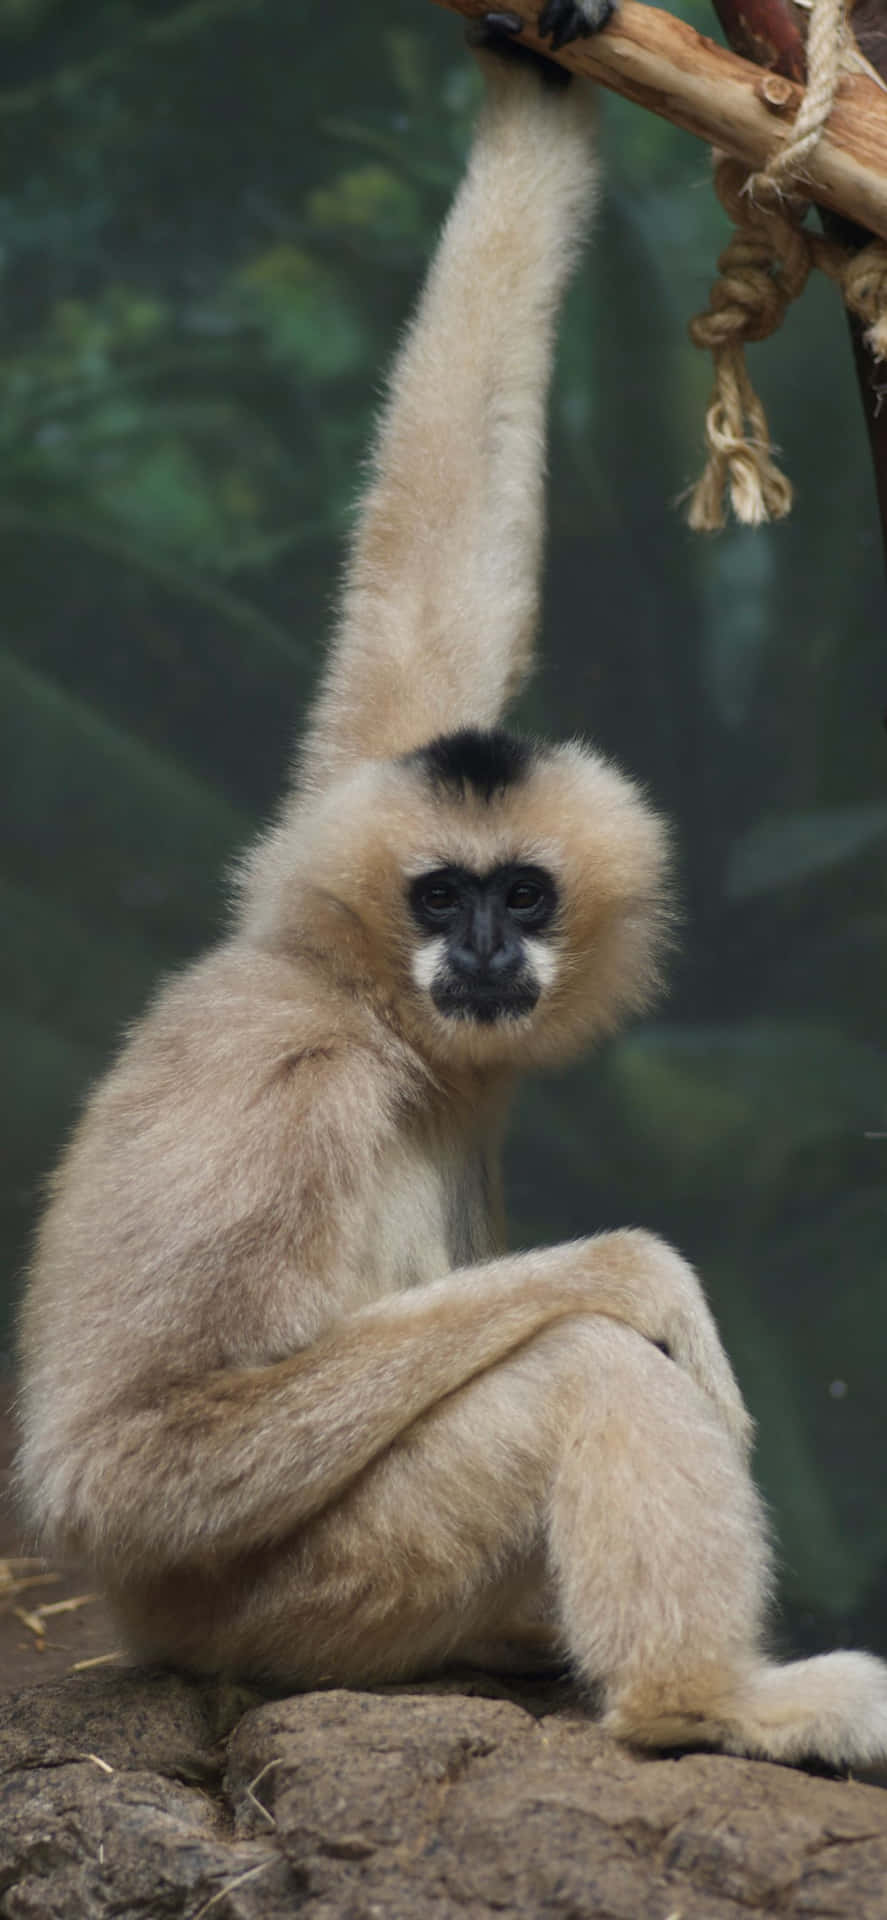 Get the latest technology with an Iphone Xs Max Gibbon